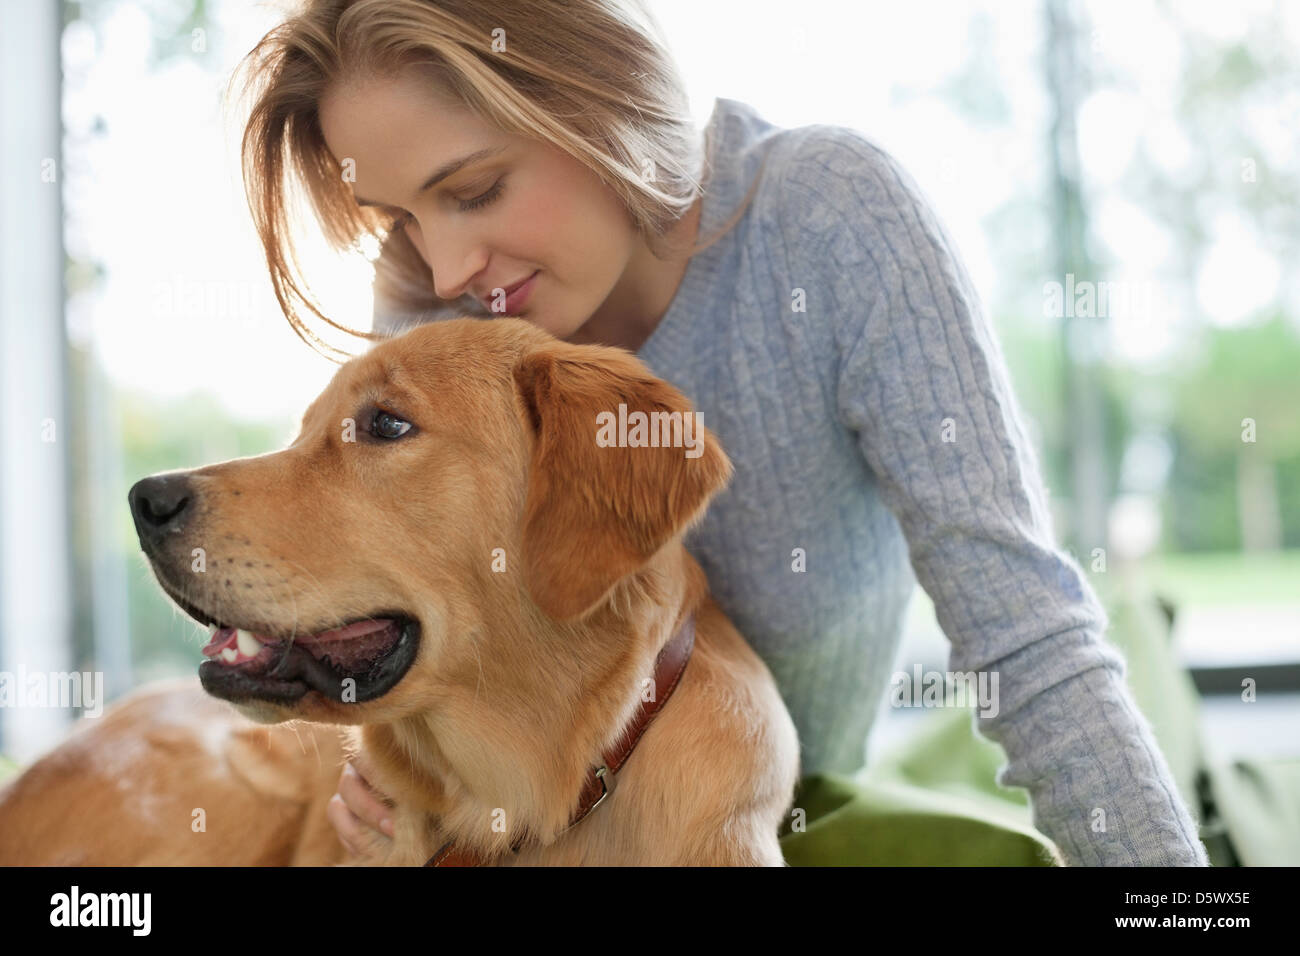 Woman relaxing with dog indoors Banque D'Images